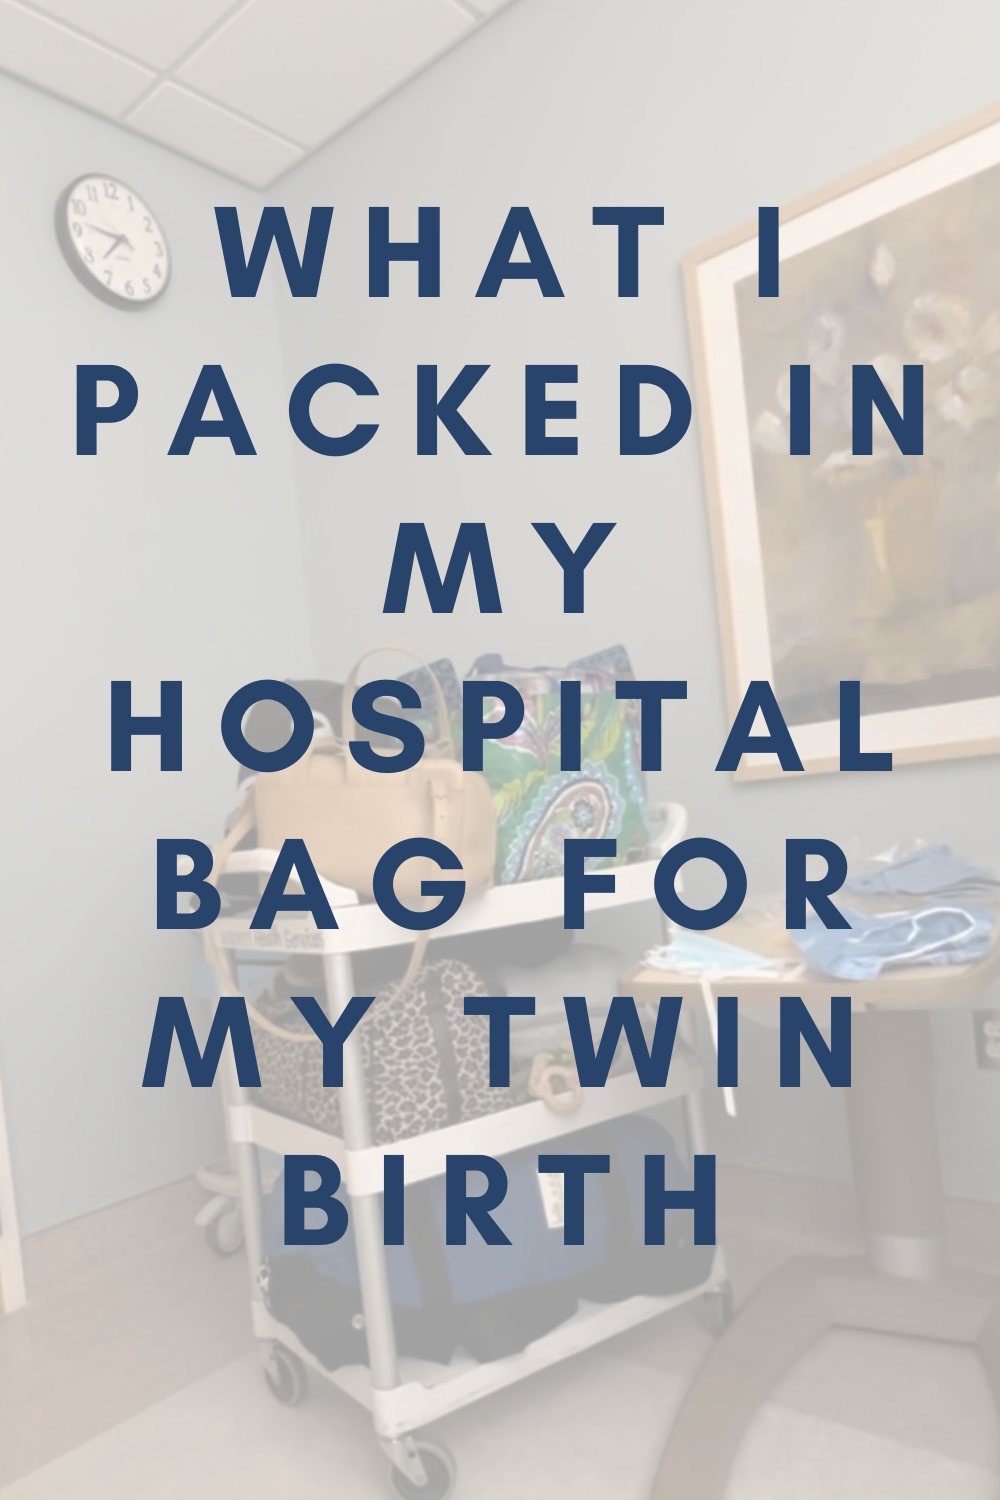 What I Packed in my Hospital Bag for my Twin Birth, c-section, cesarean section, what I didn't use in my hospital bag, what I wish I brought to the hospital, lments of style, what i forgot to bring to the hospital